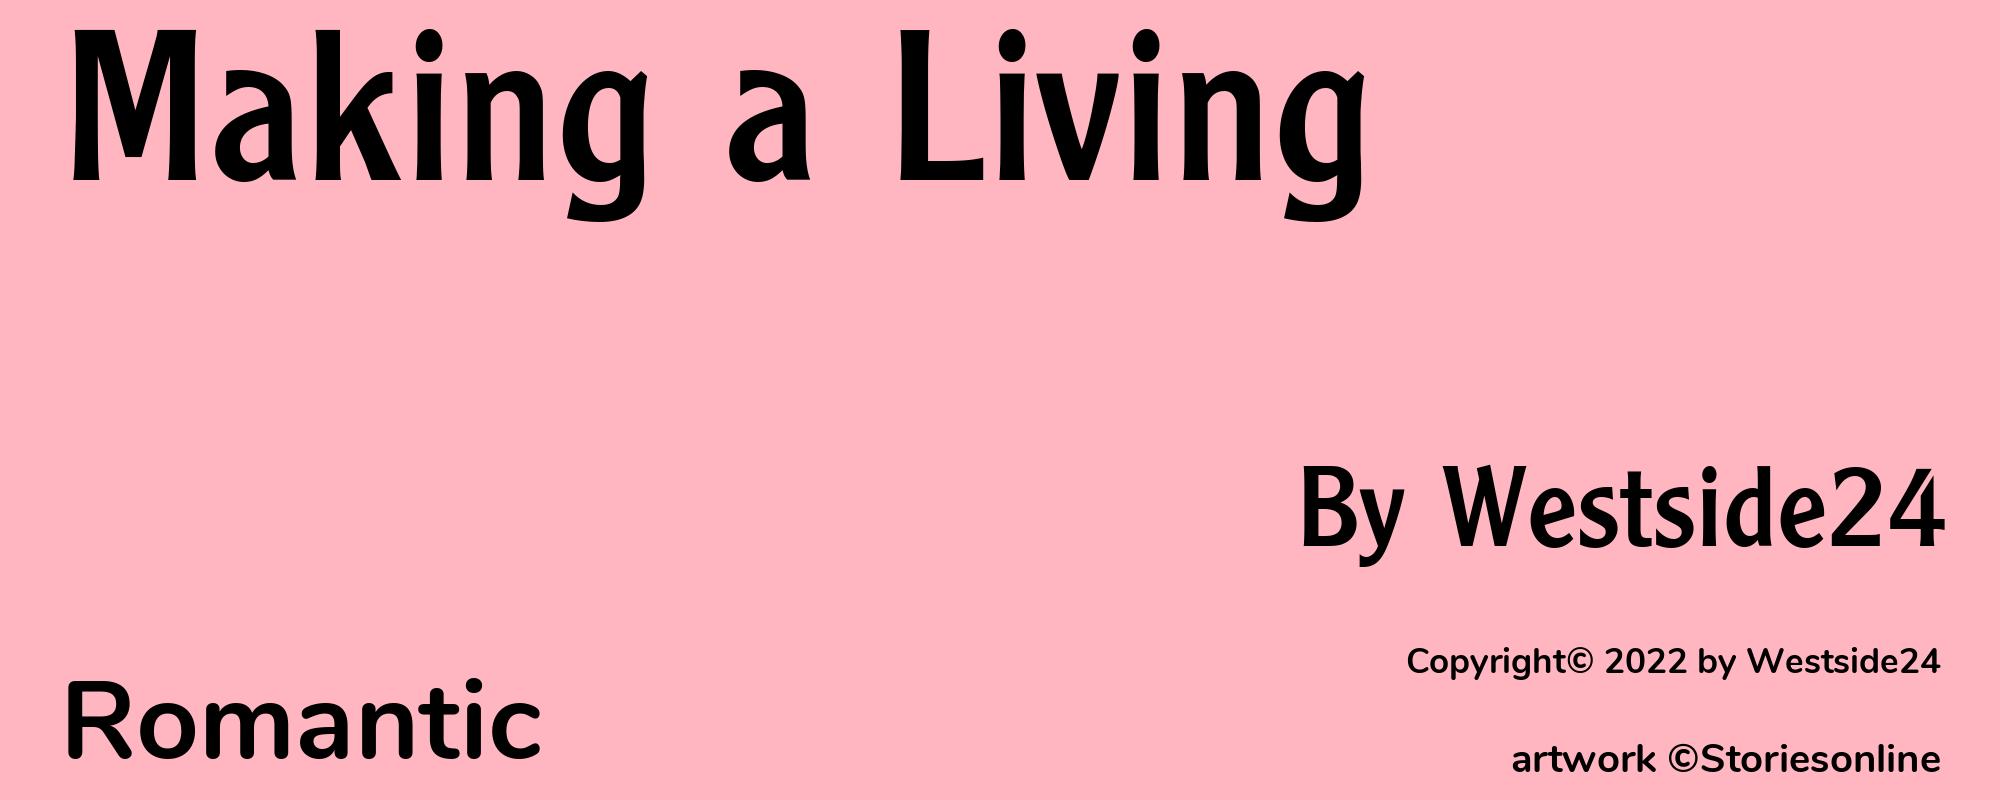 Making a Living - Cover